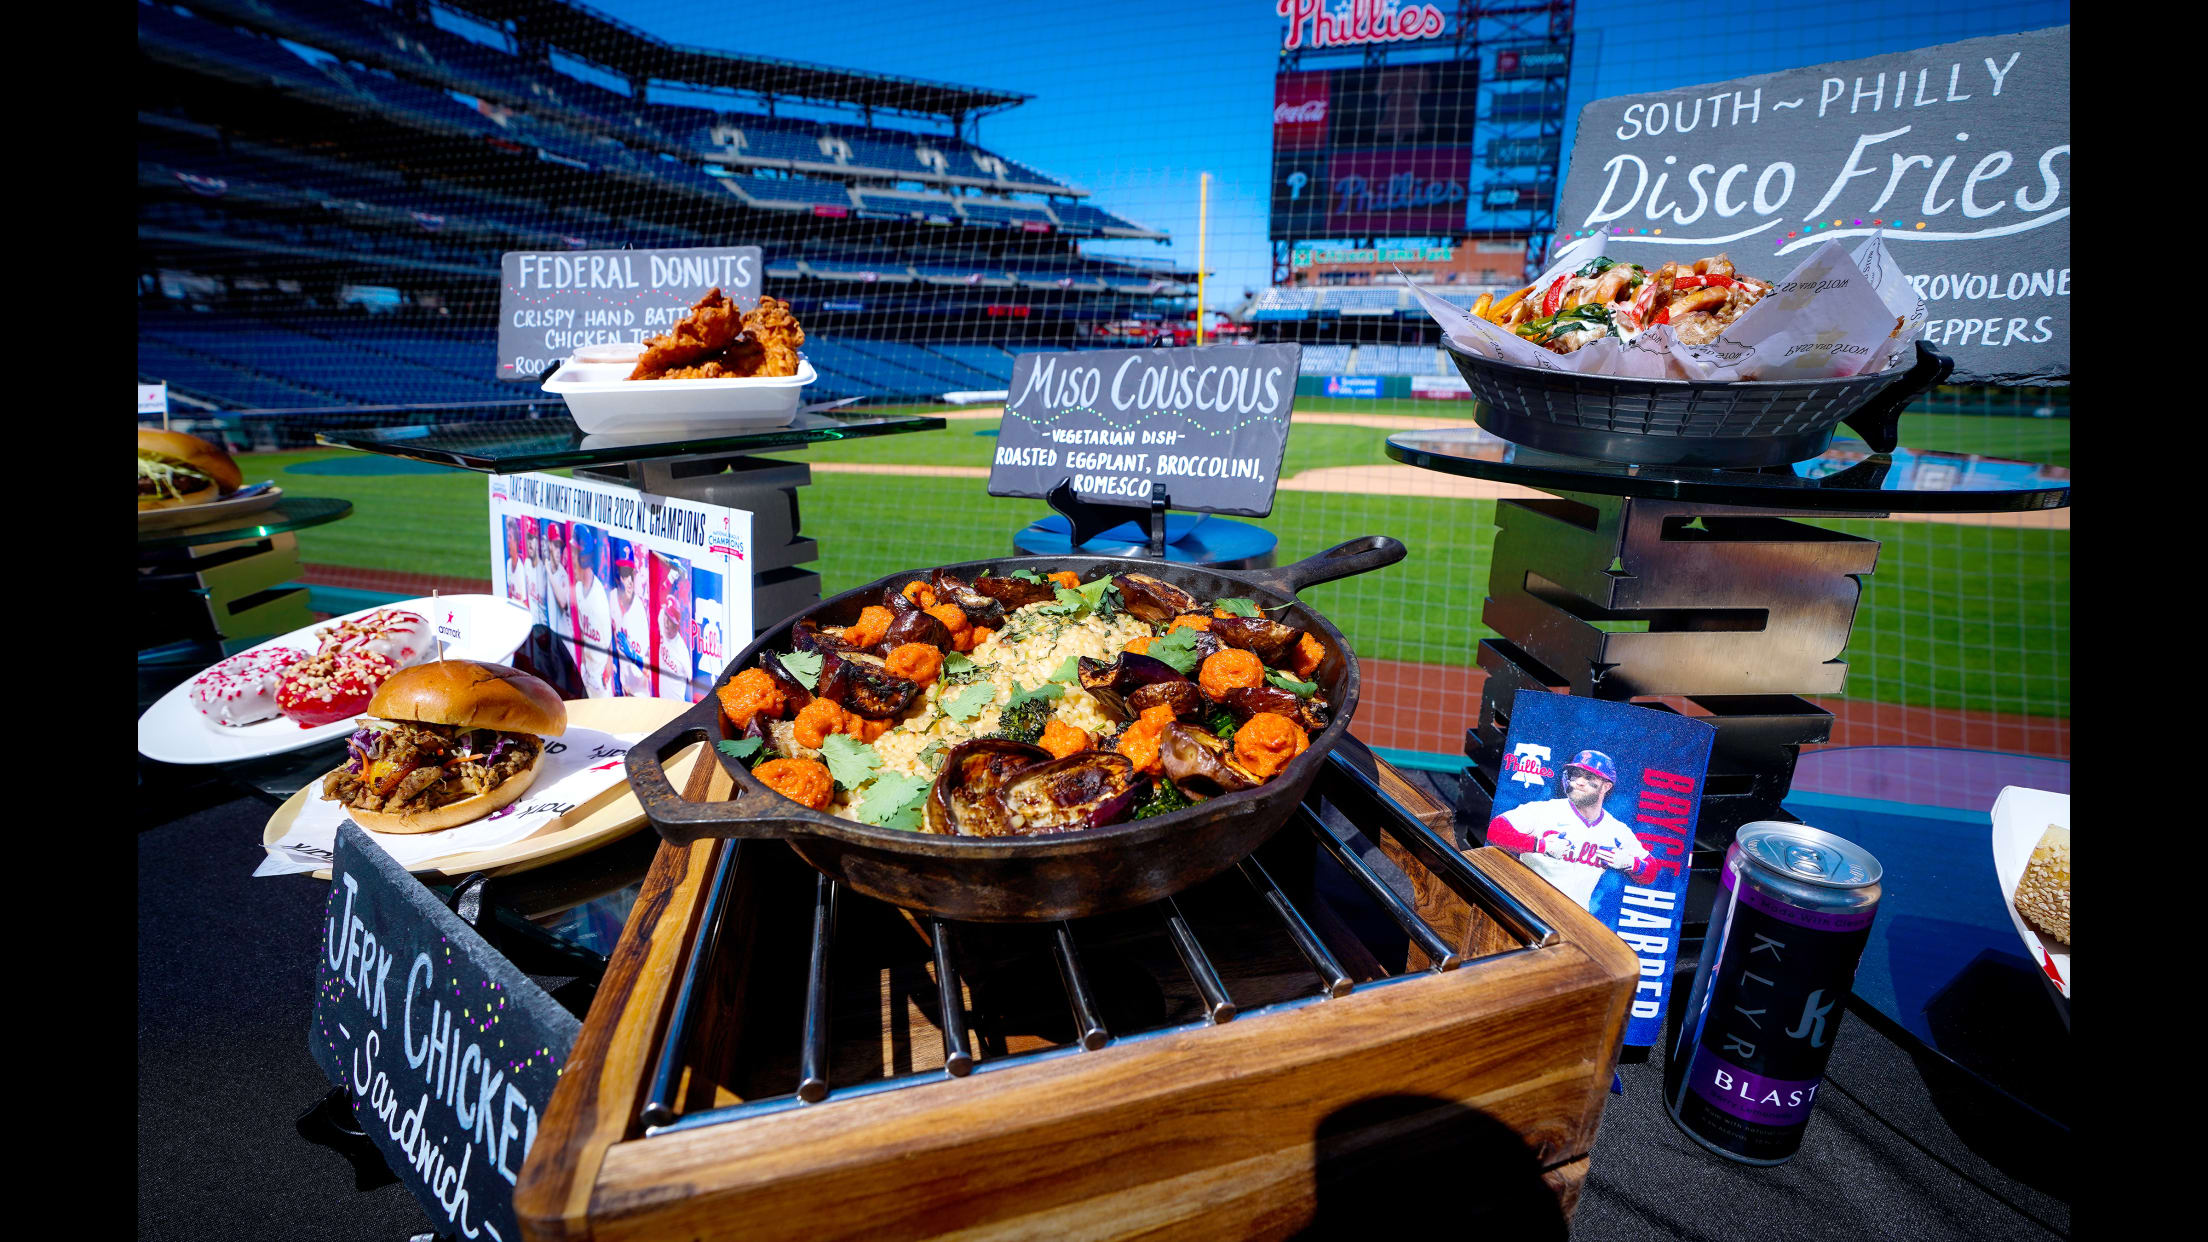 Phillies Massive Videoboard New Food and Gear for 2023 Season